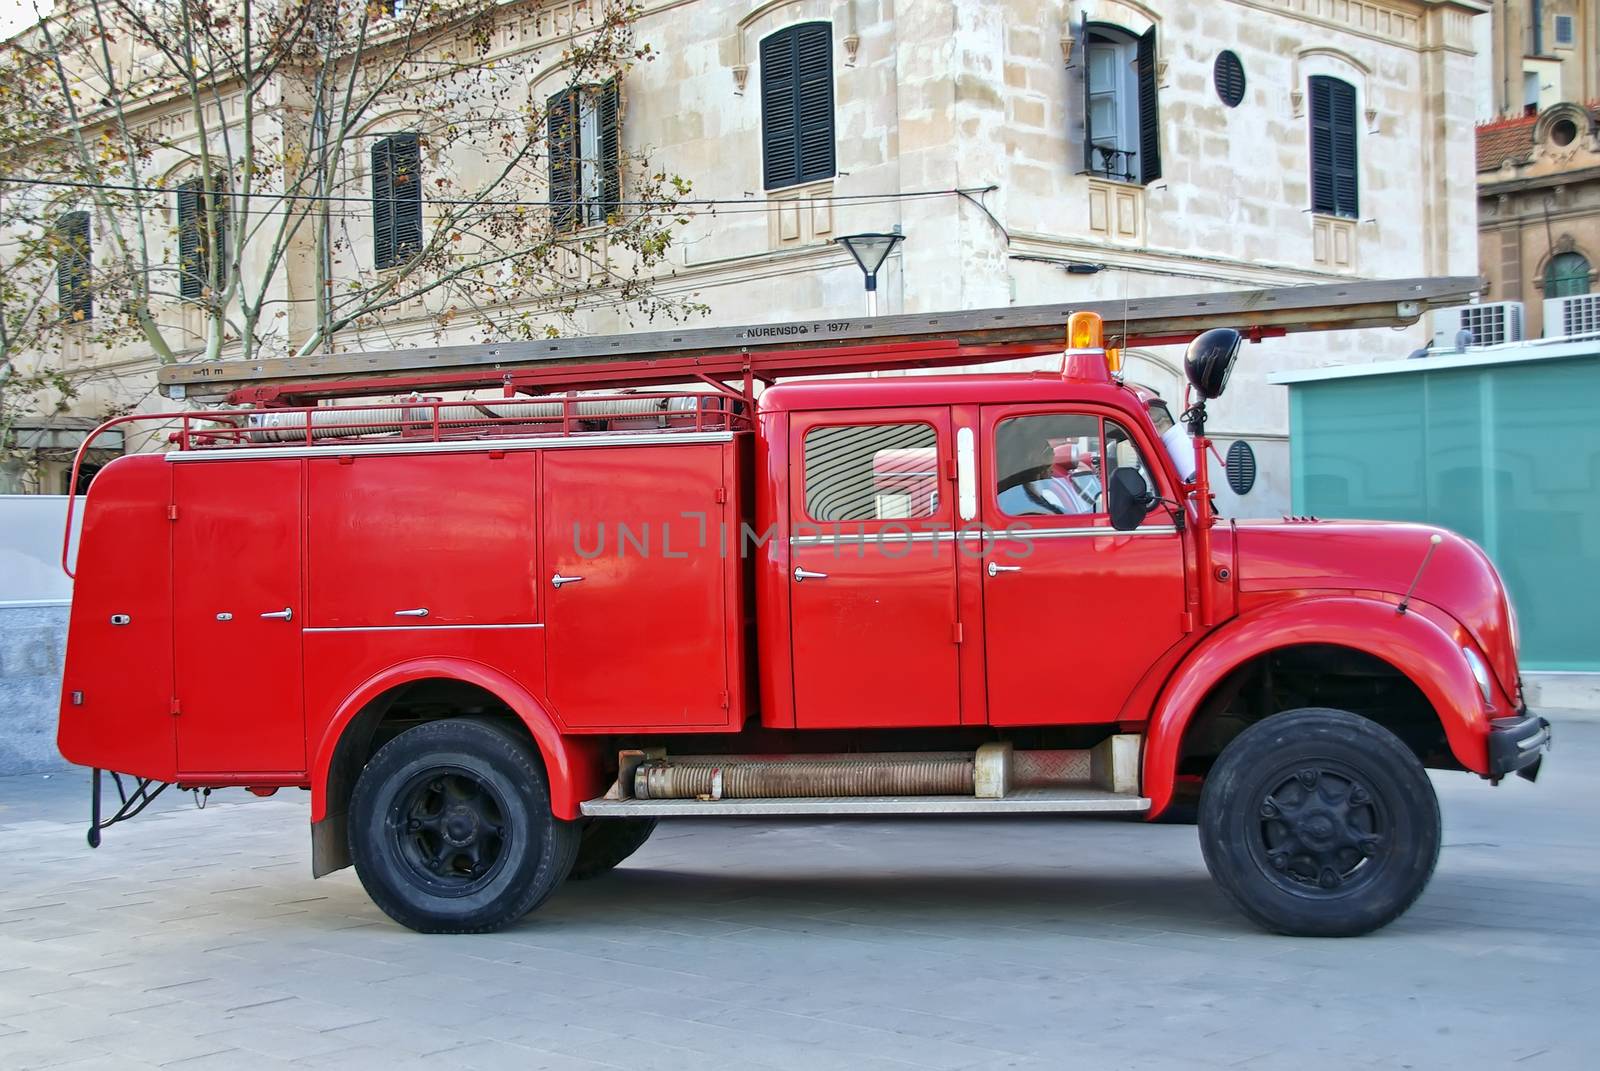 Old red firemen truck in an exhibition